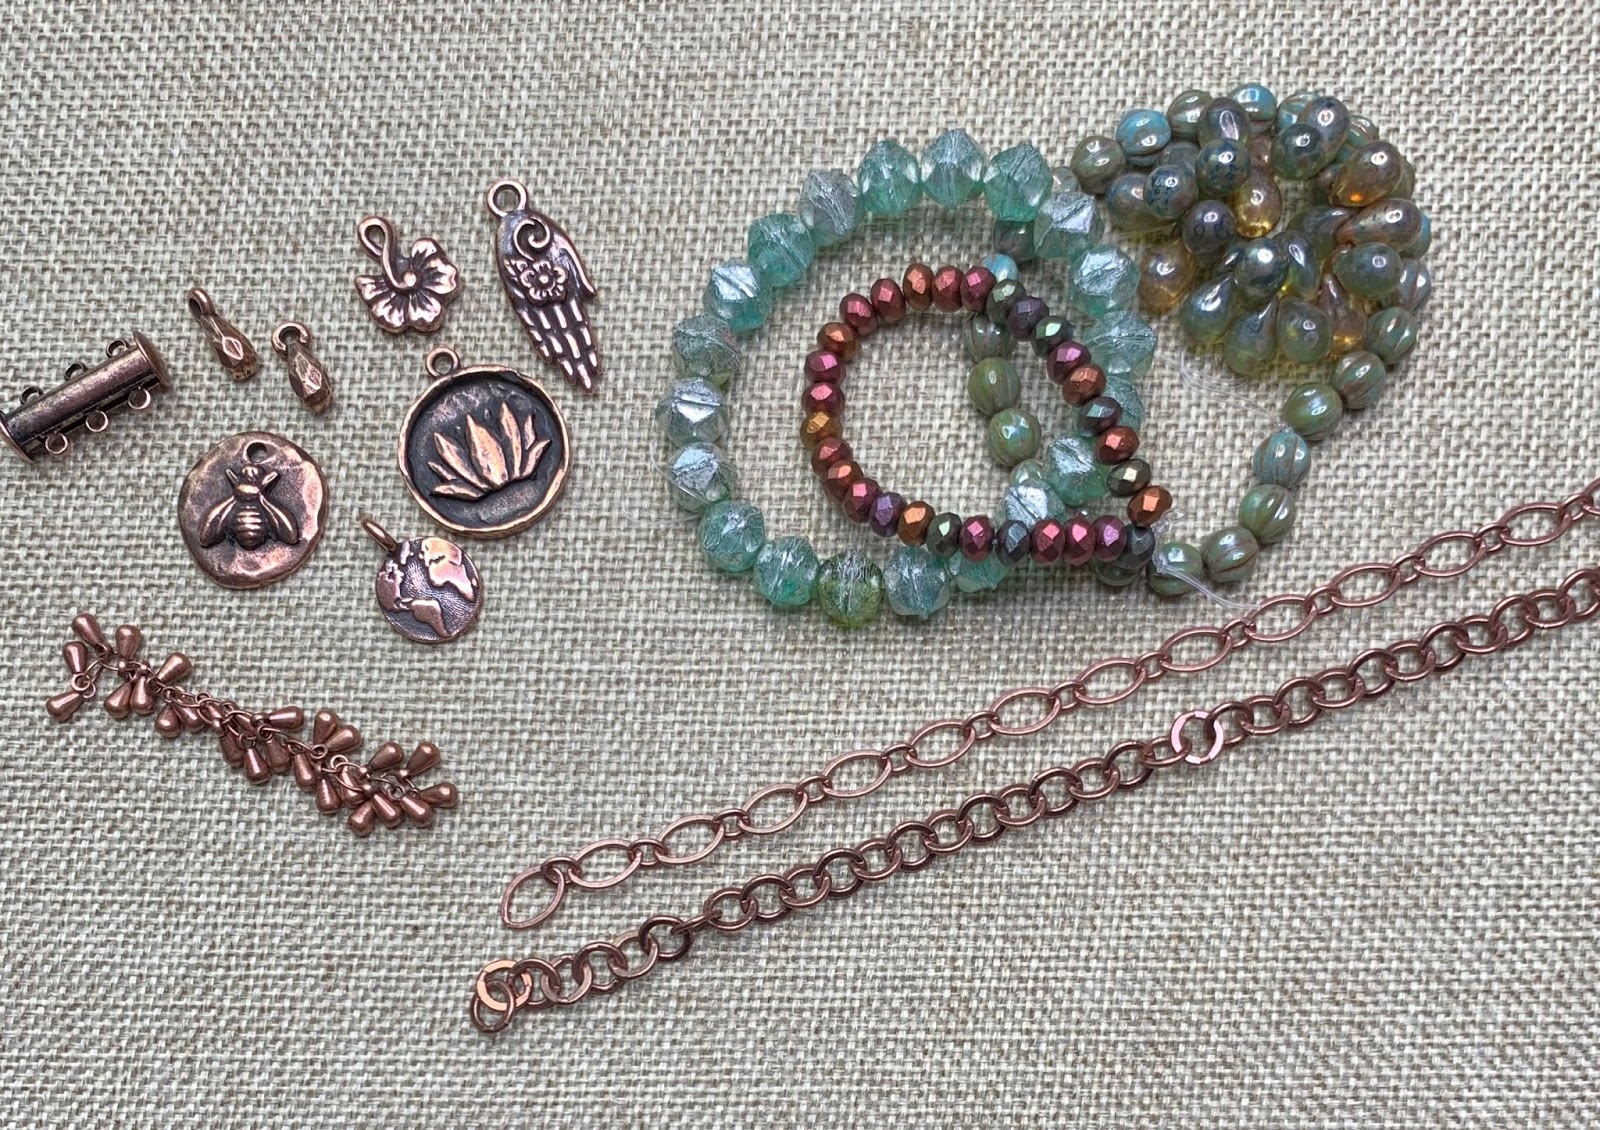 The Bead Table: May 2020